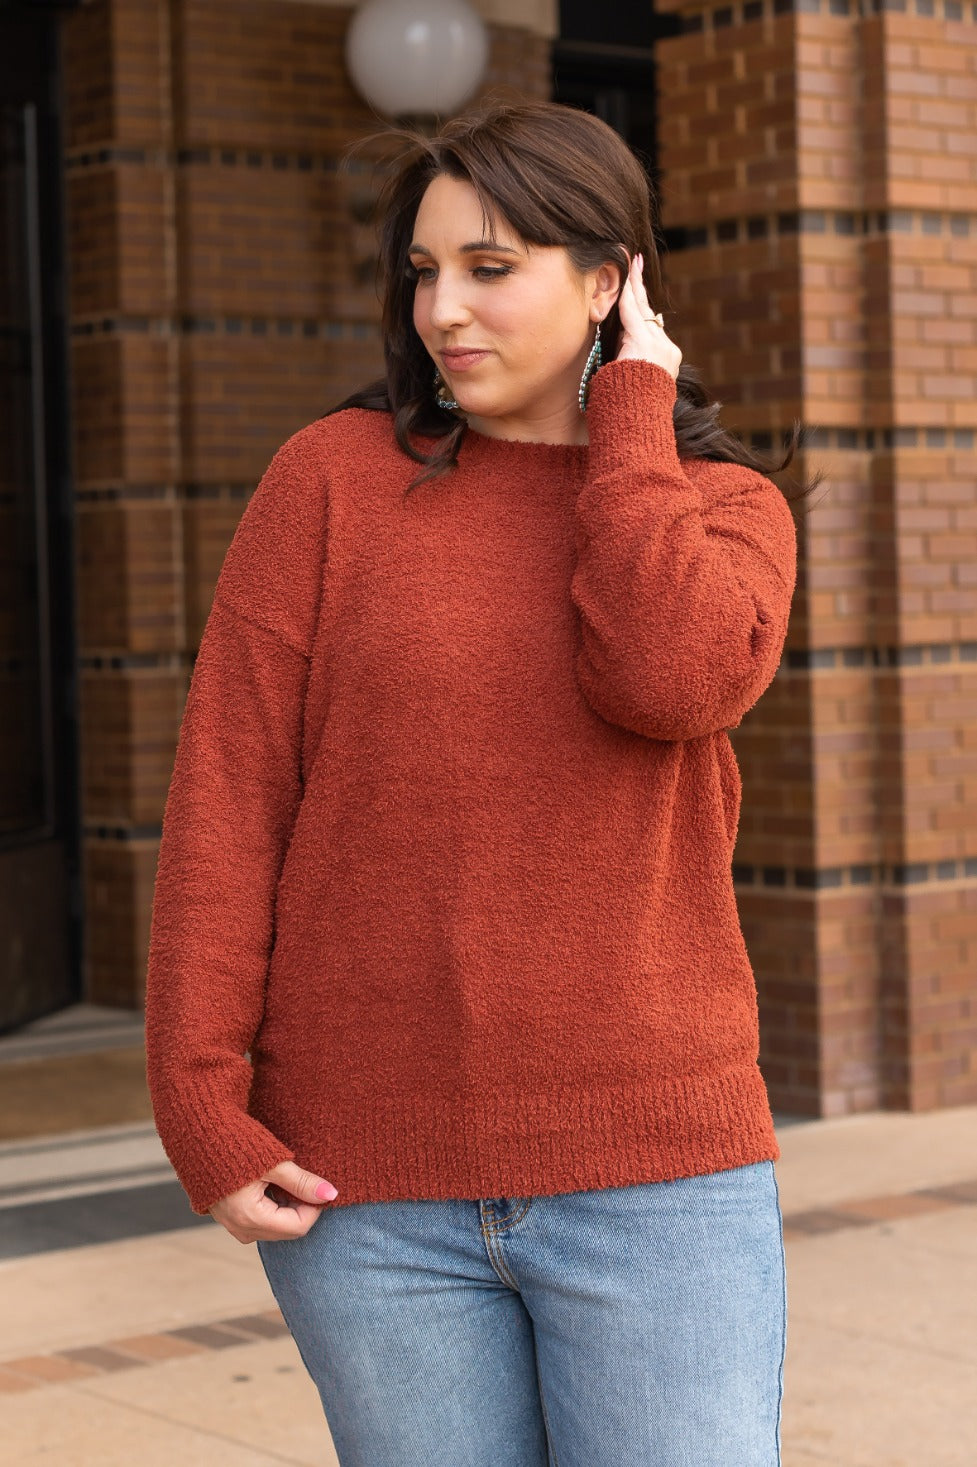 In With The New Rust Faux Mohair Sweater